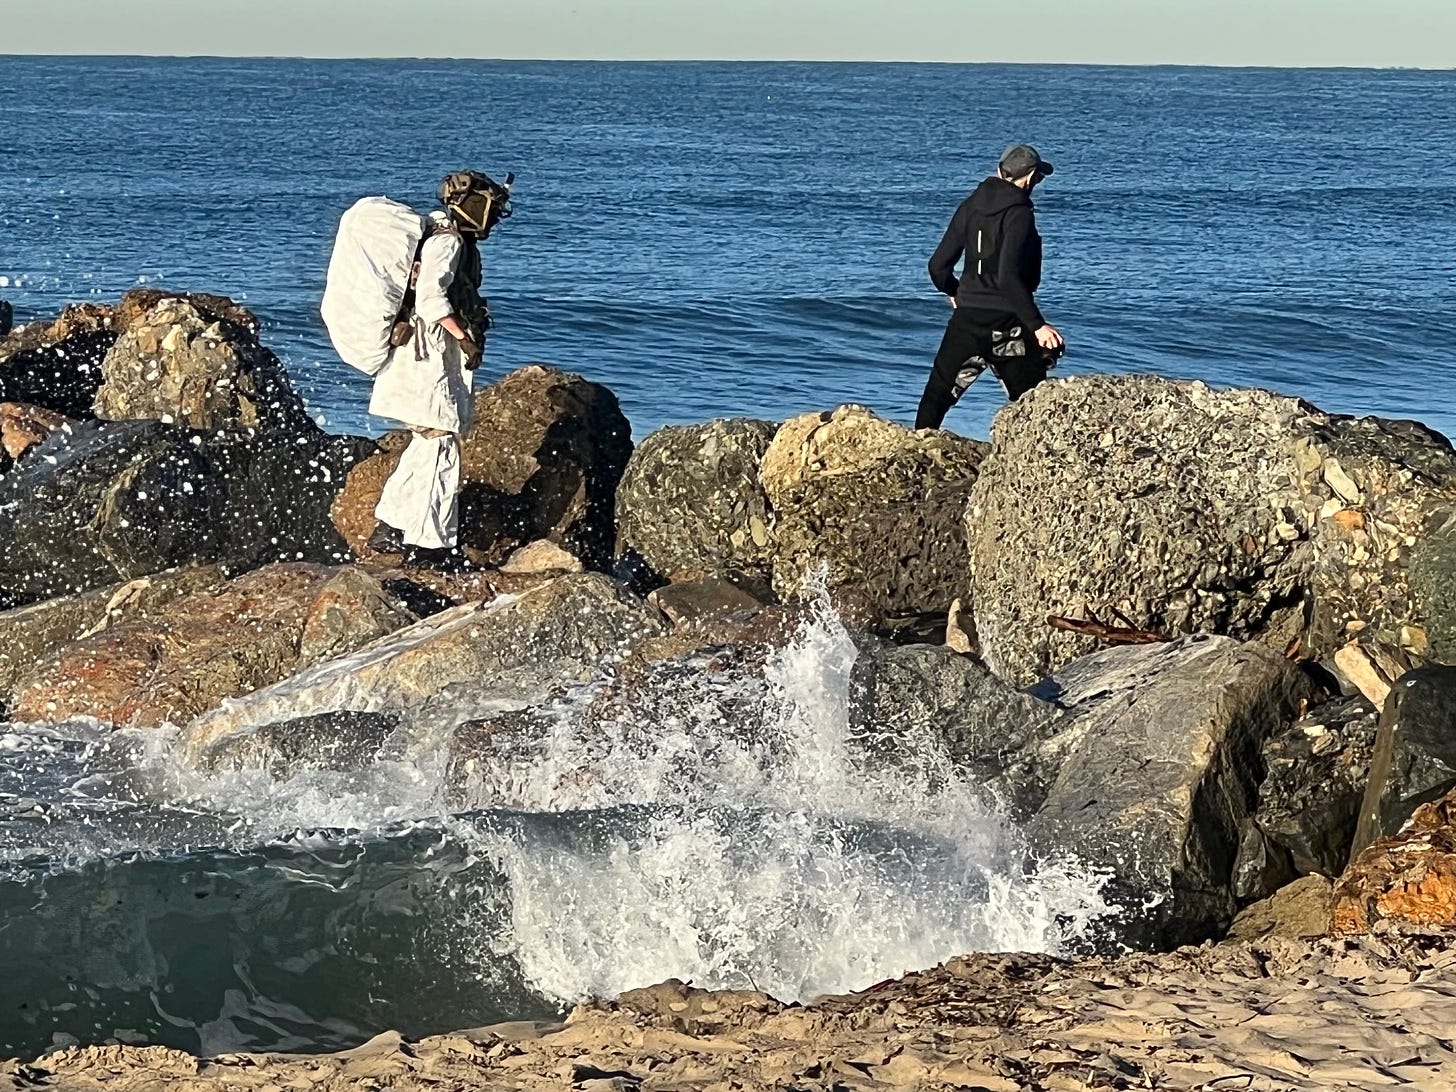 Picture of two men walking over Pacific breakers, one in a strange white outfit and helmet, the other in black with a camera in his hand